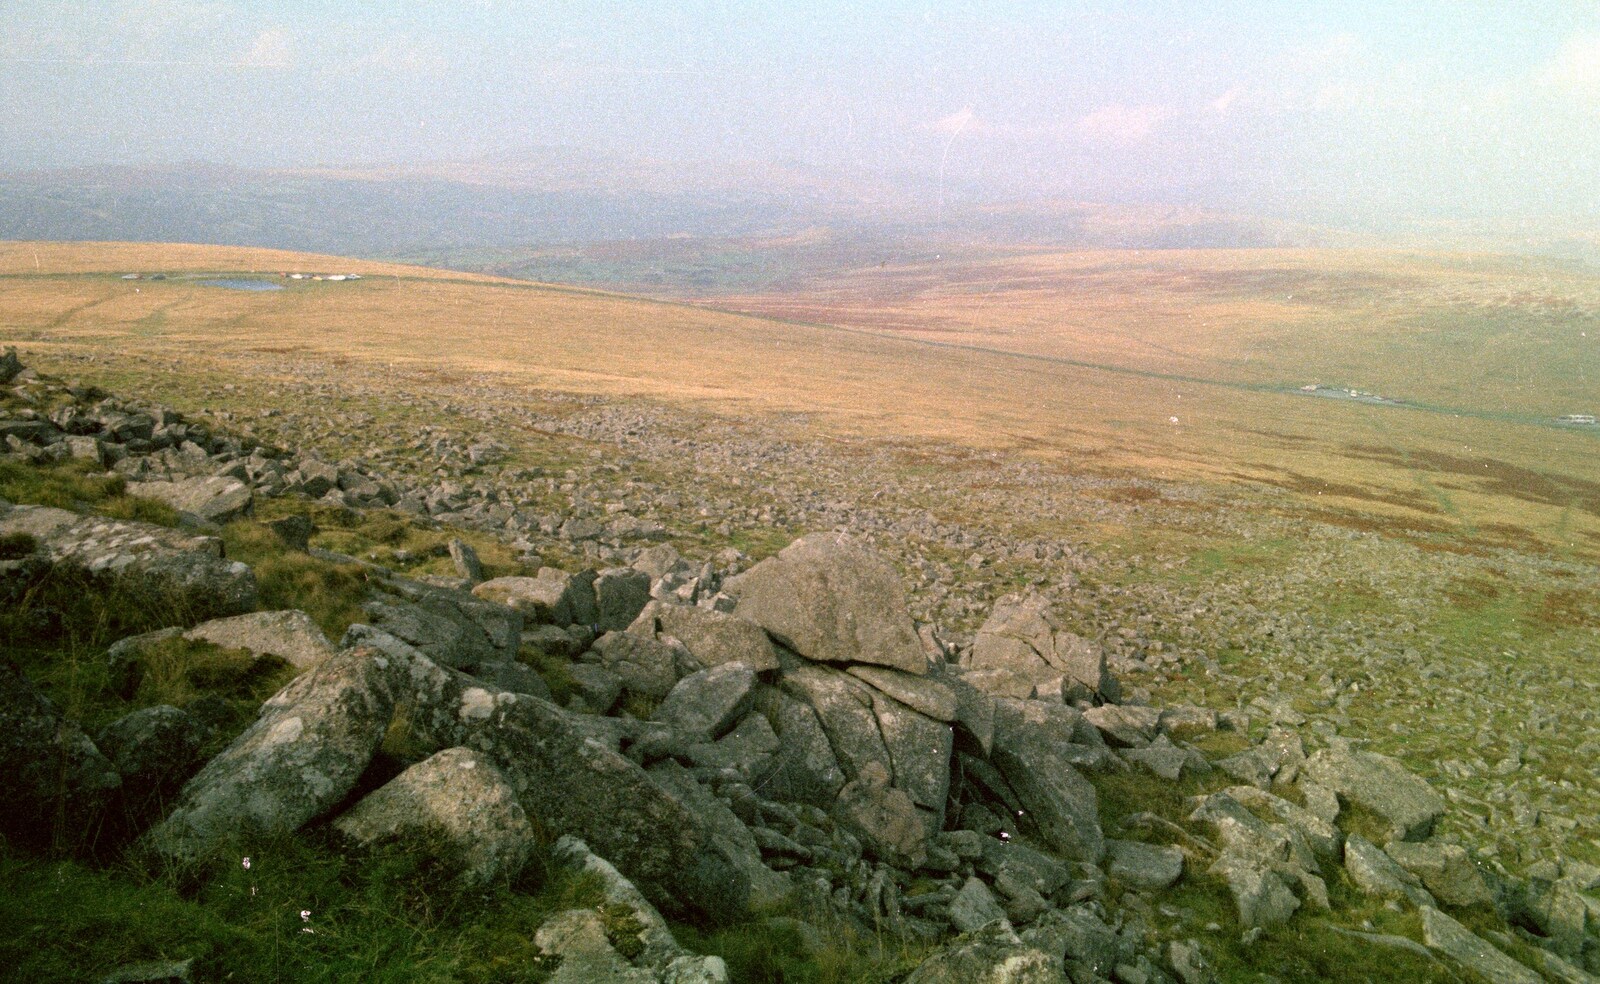 A Dartmoor view from A Trip to Trotsky's Mount, Dartmoor, Devon - 20th March 1987